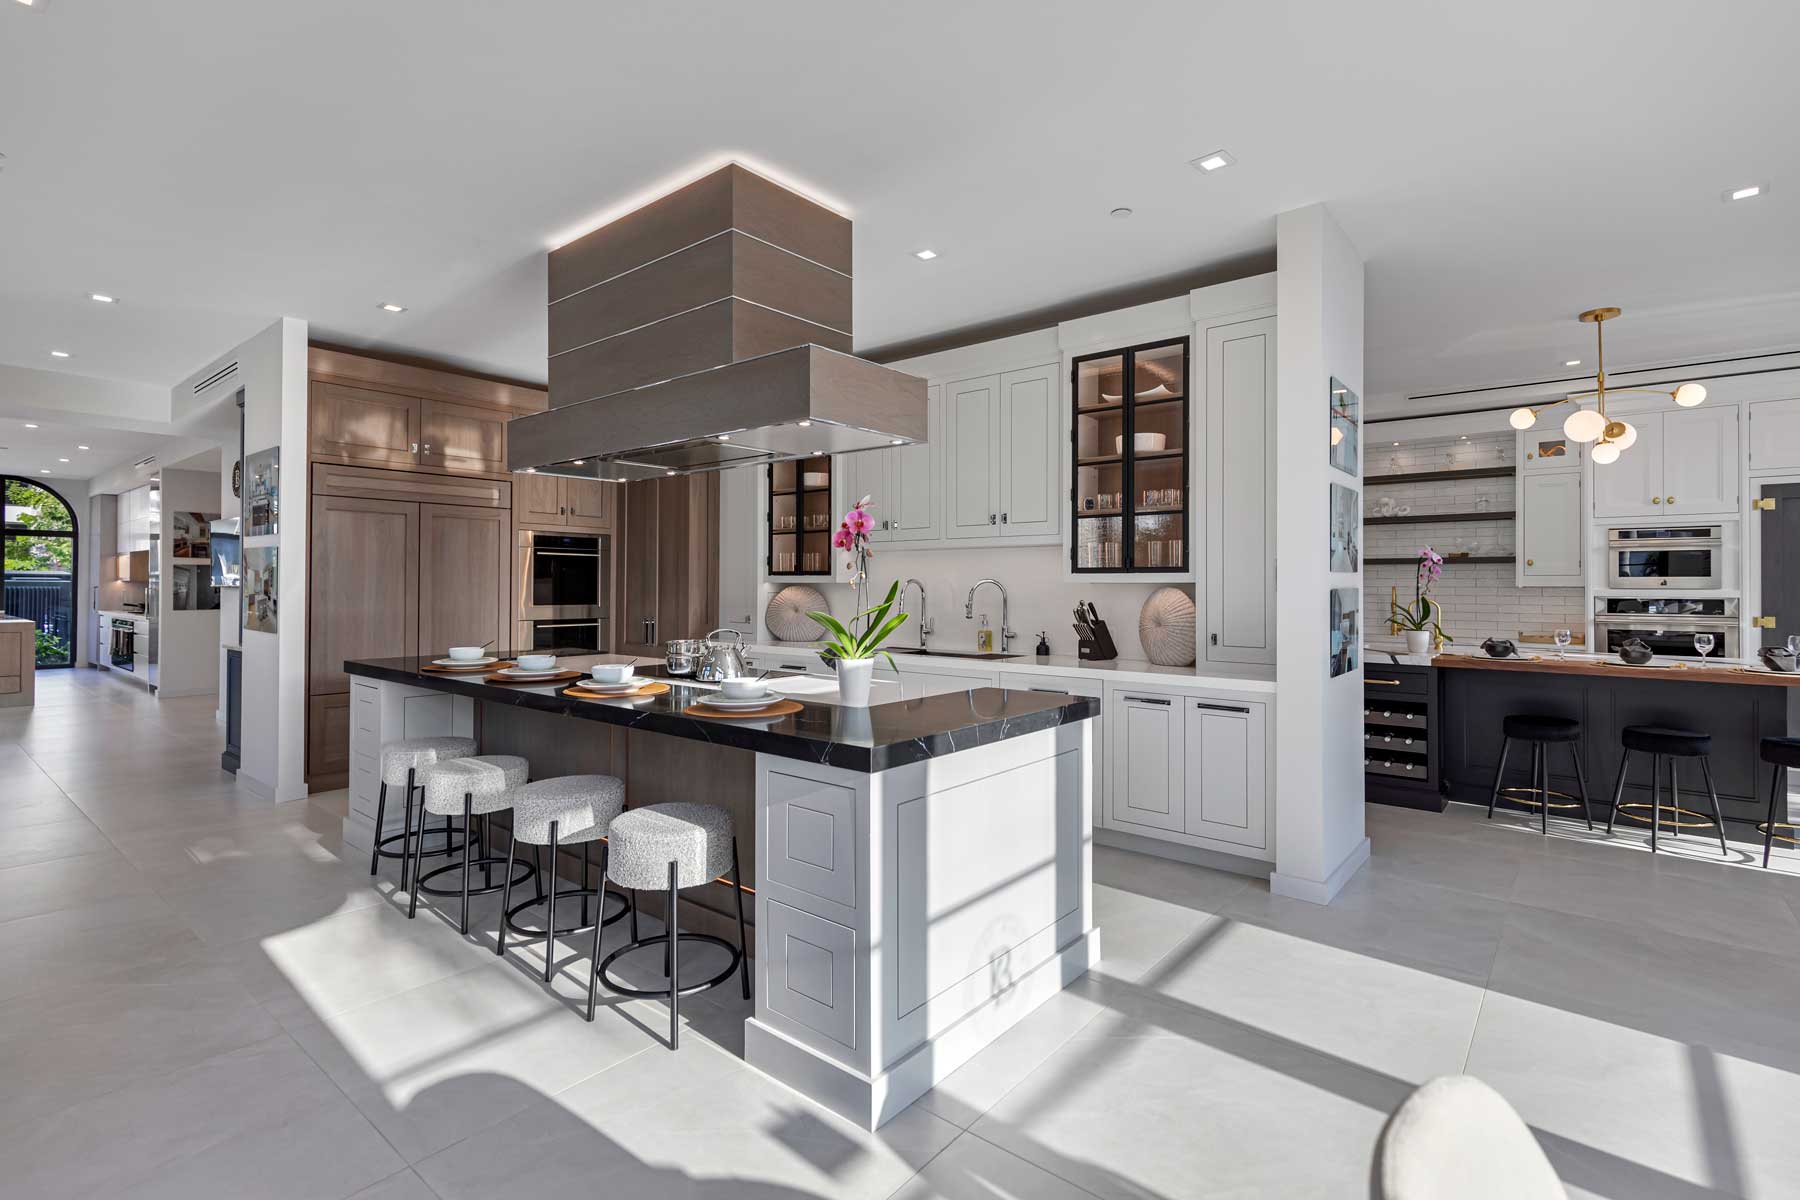 Bakes & Kropp - kitchen design and luxury cabinetry company